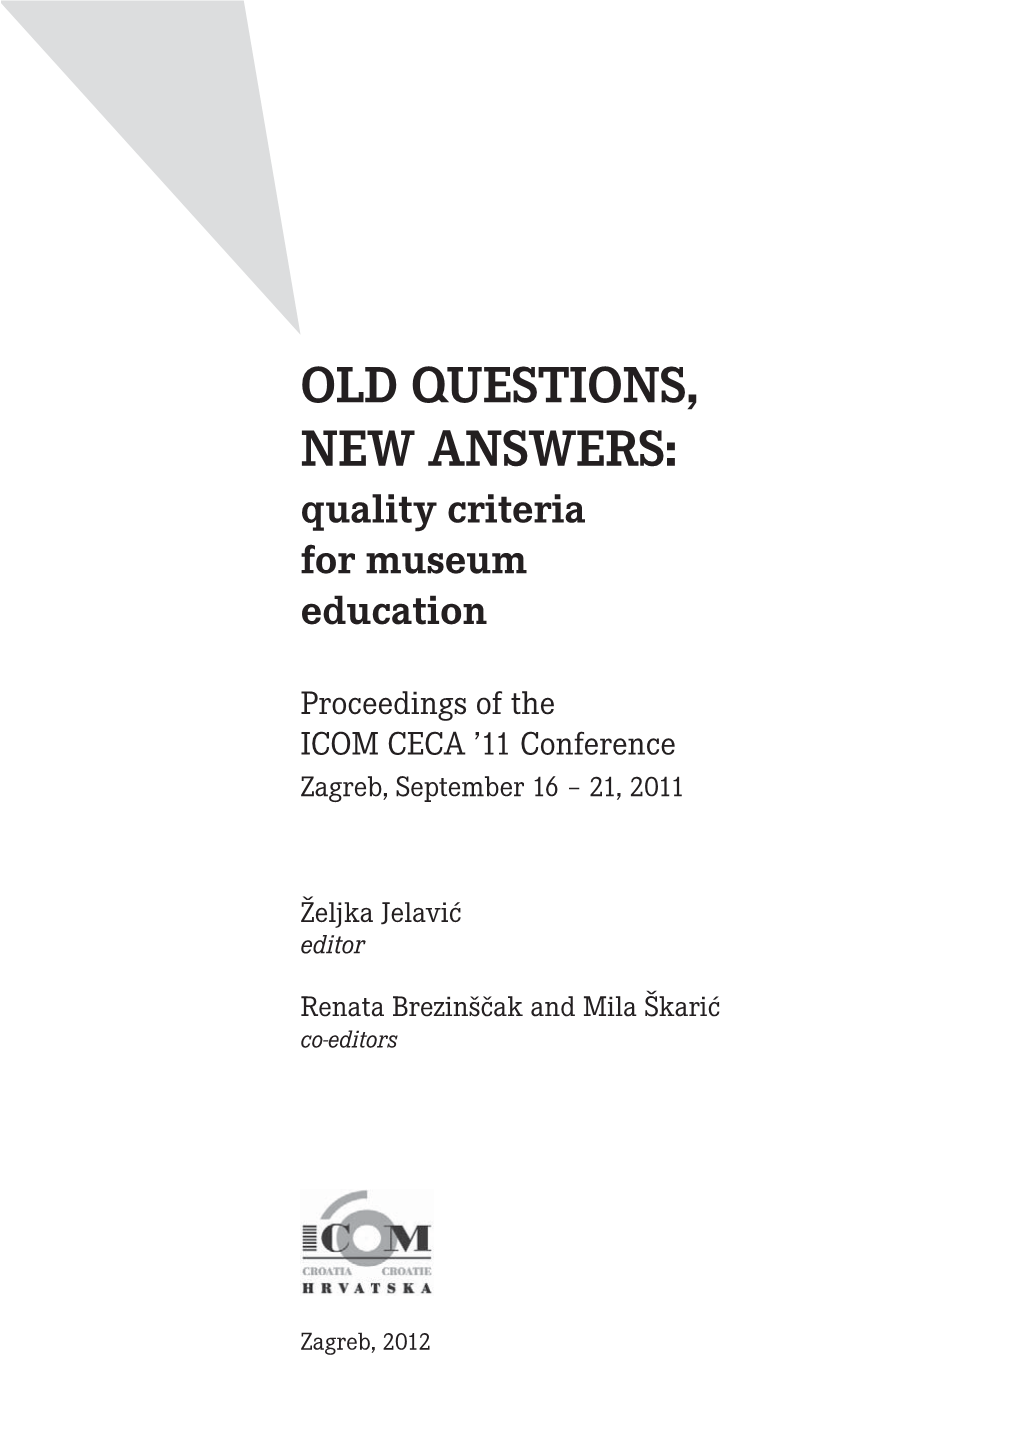 OLD QUESTIONS, NEW ANSWERS: Quality Criteria for Museum Education